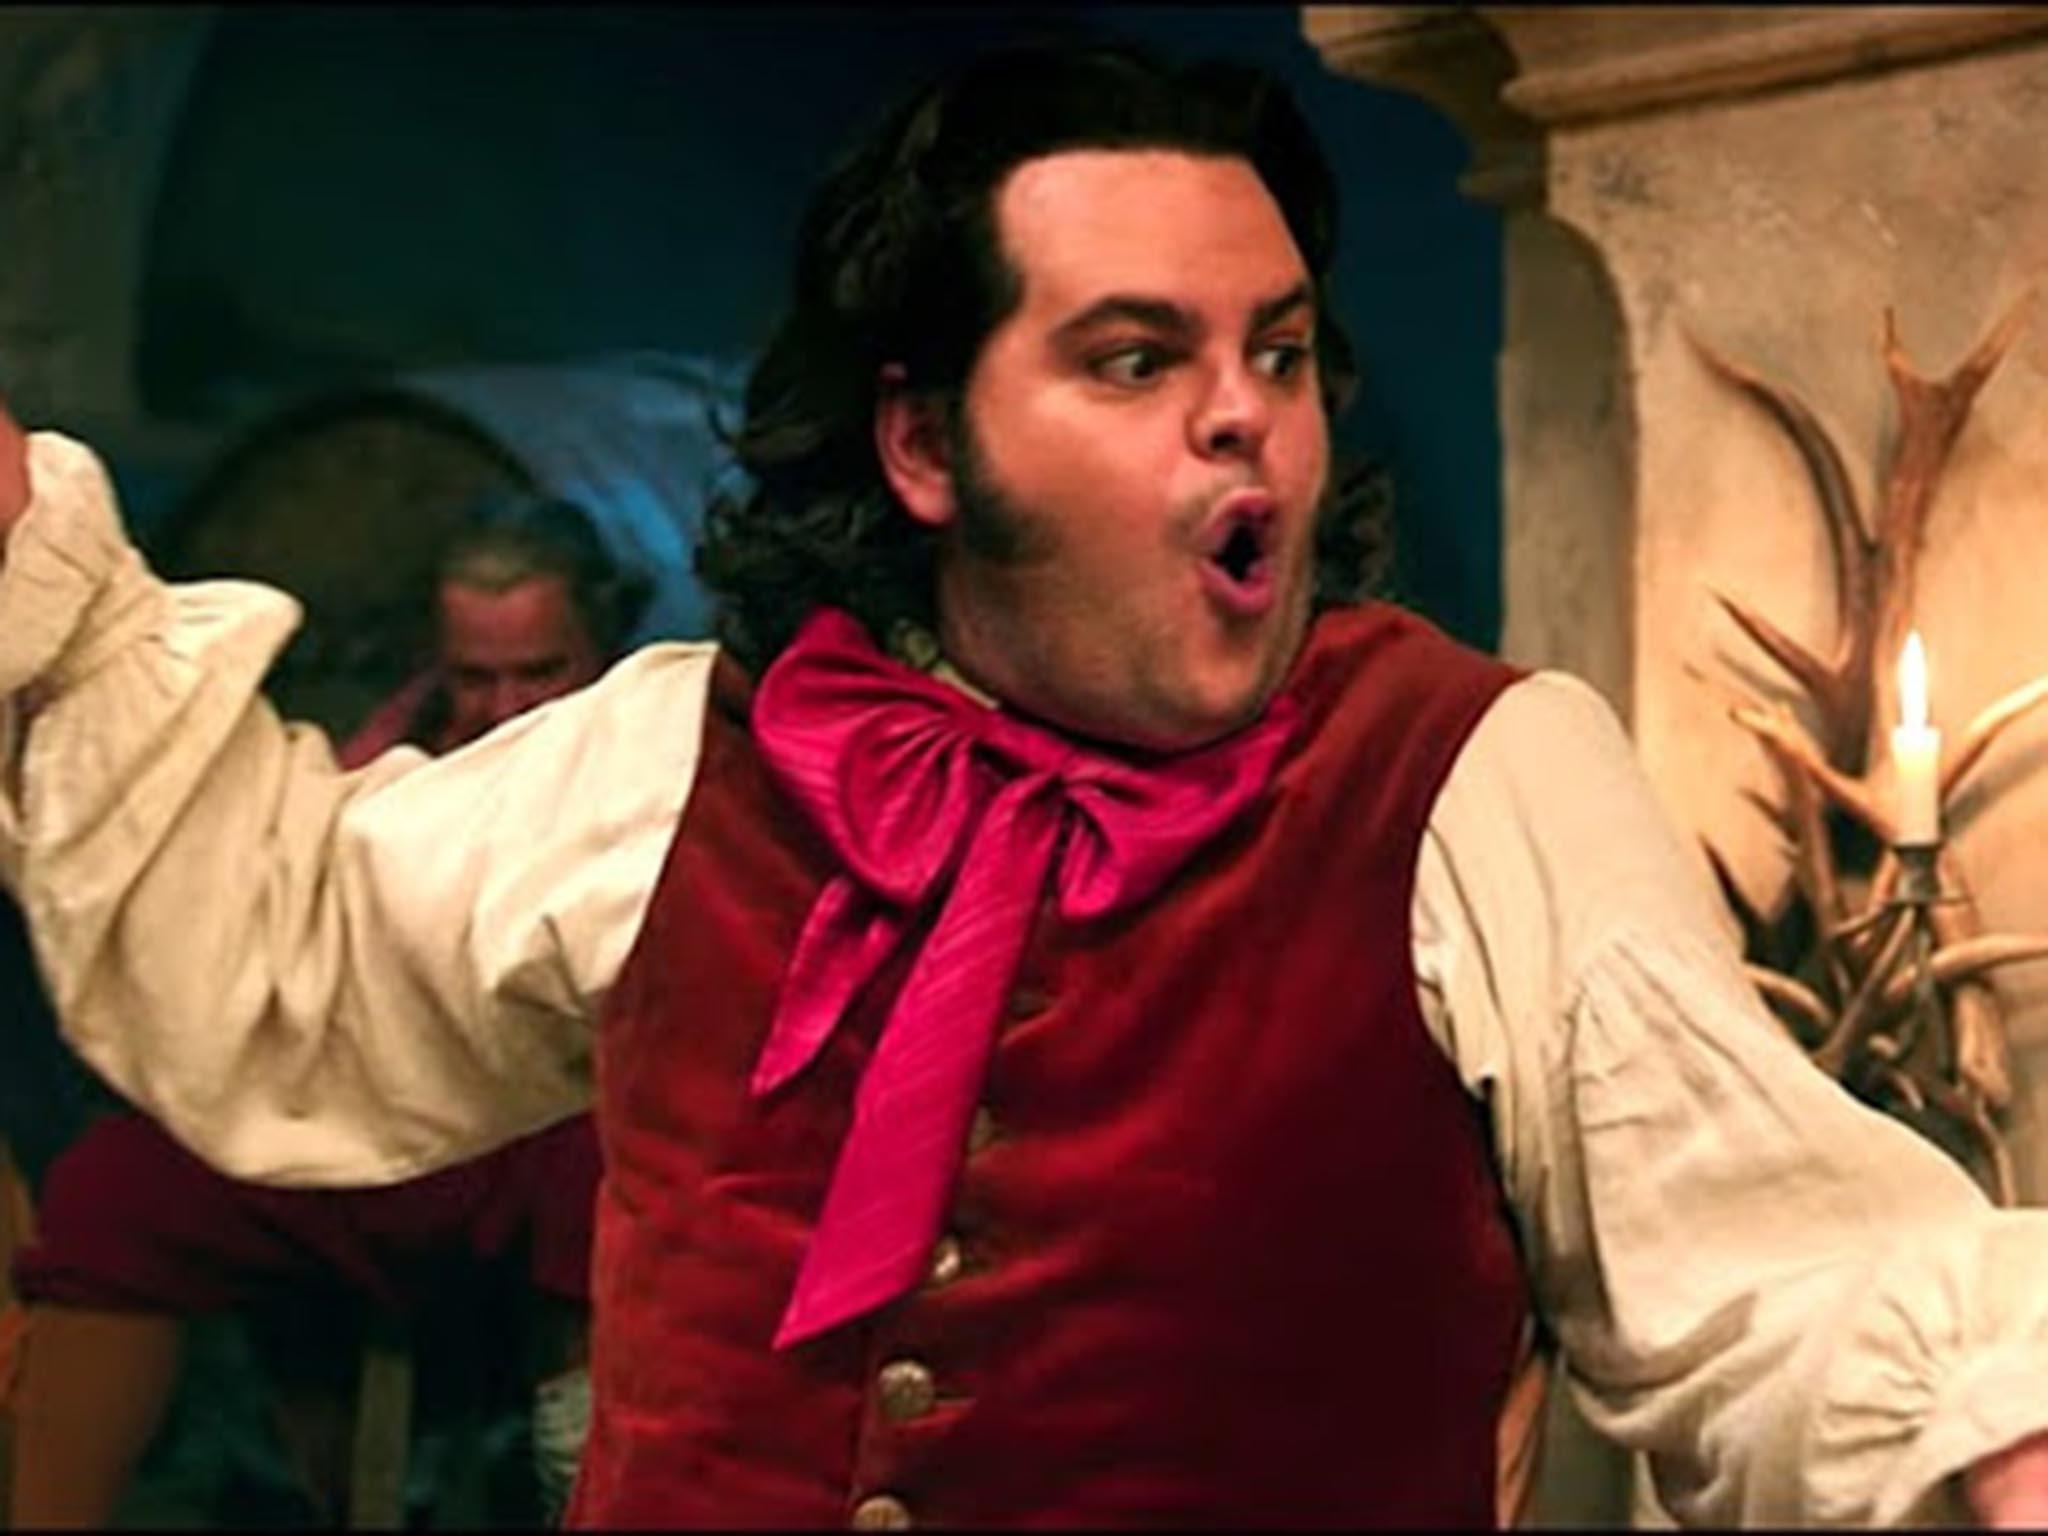 LeFou in Disney’s 'Beauty and the Beast' is also a gay character in a children's story